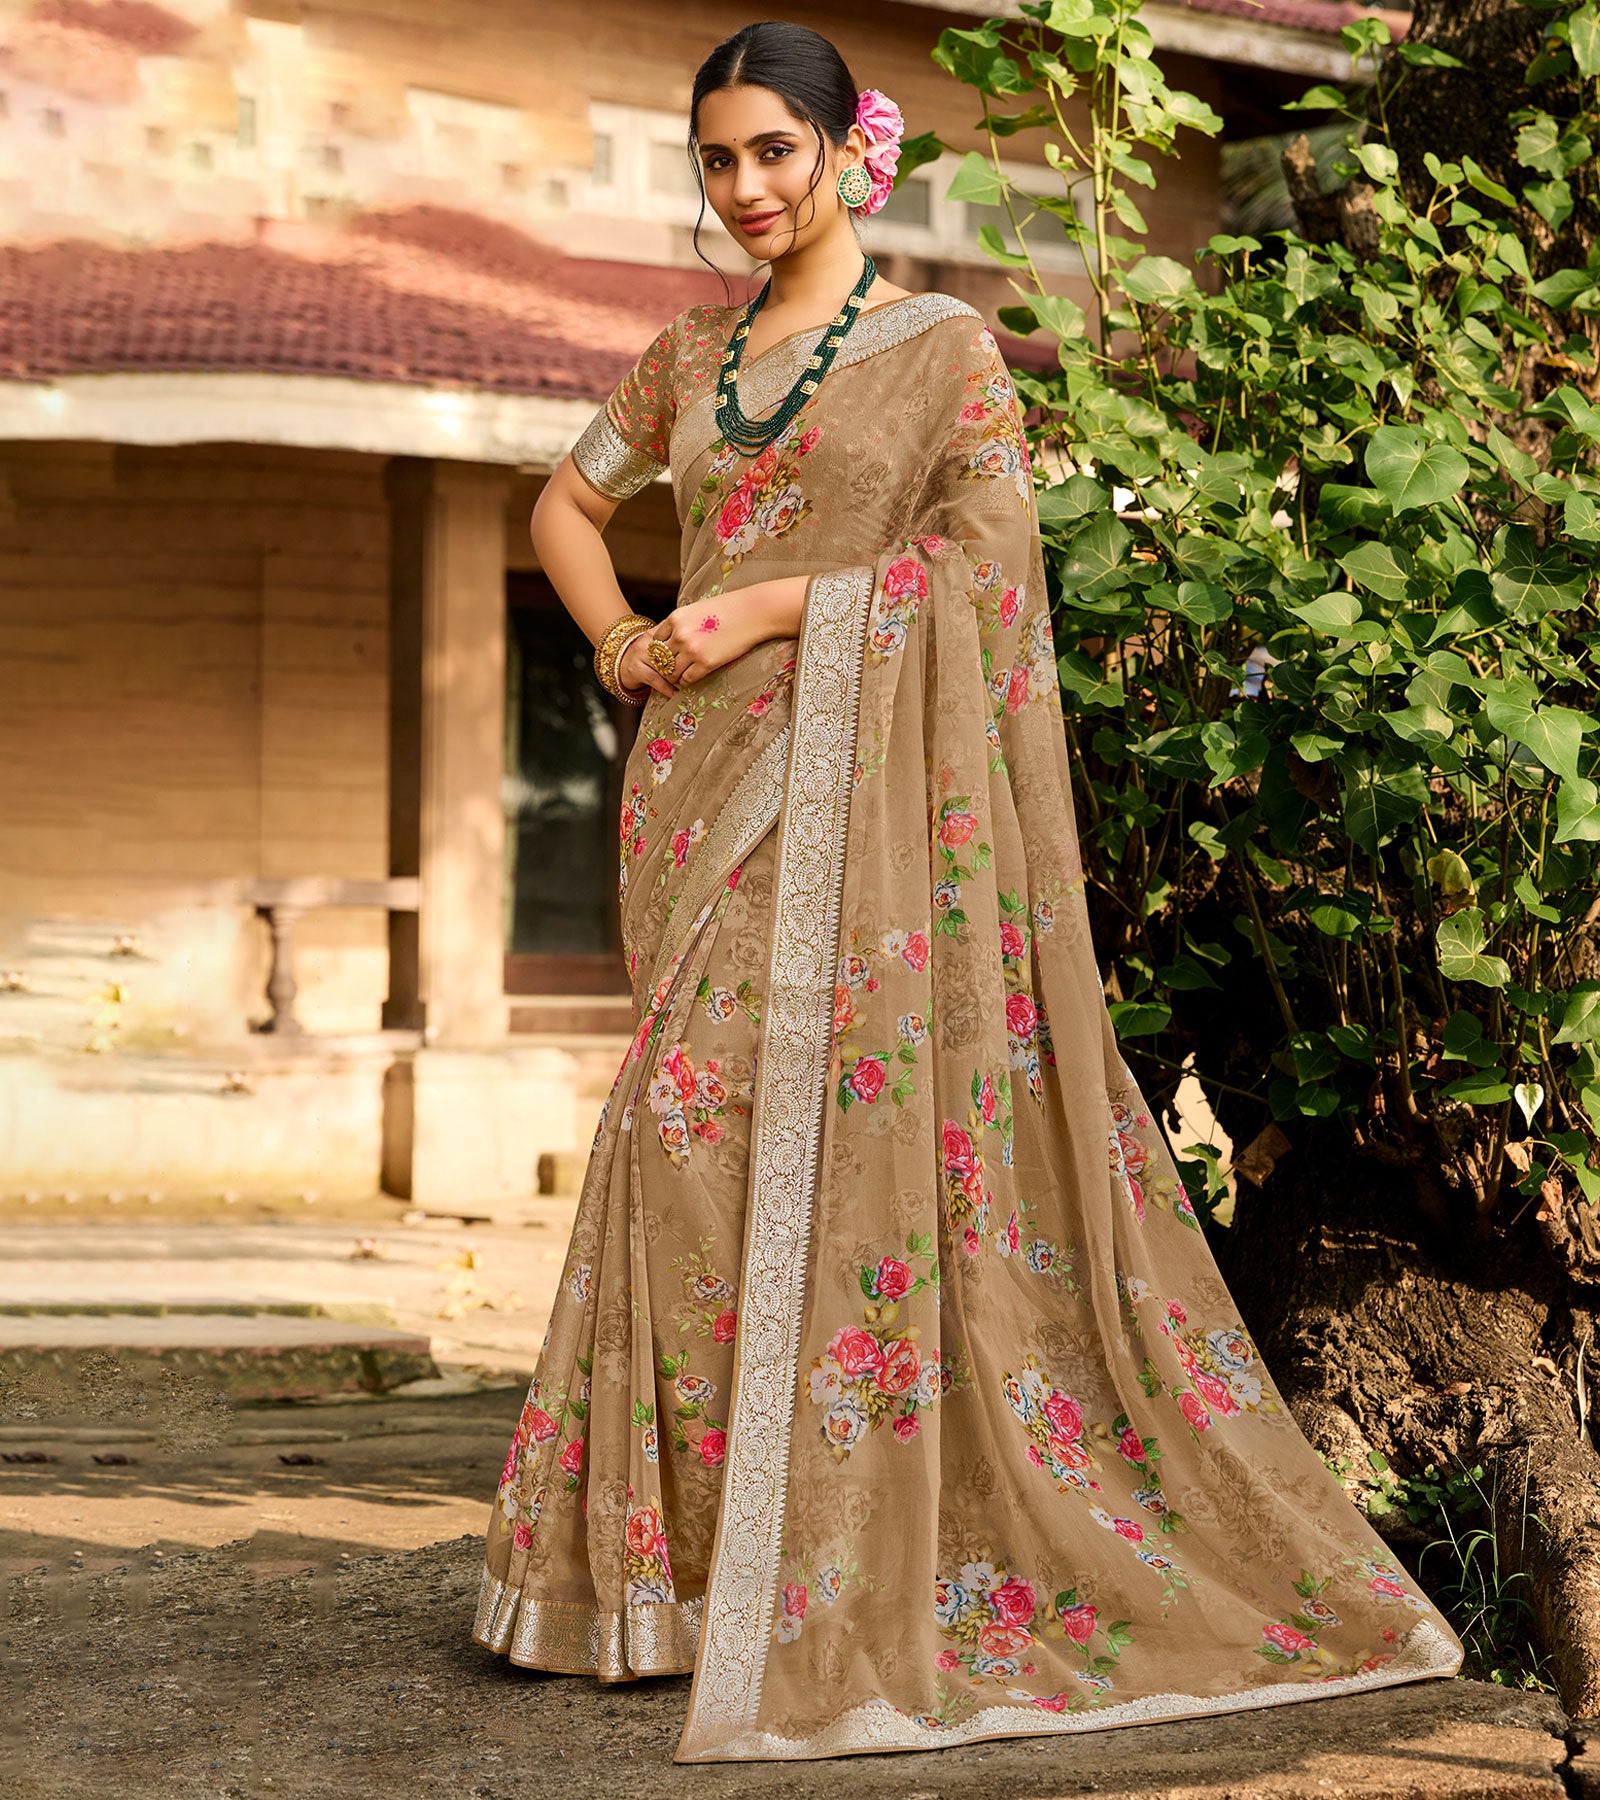 Laxmipati Sarees - Presenting Our New Collection DILRUBA. This catalog is  full of resplendent sarees, That you would certainly love to flaunt. Check  the collection in the link below: https://www.laxmipati.com/shop/sarees/catalog/dilruba  Model Courtesy- @